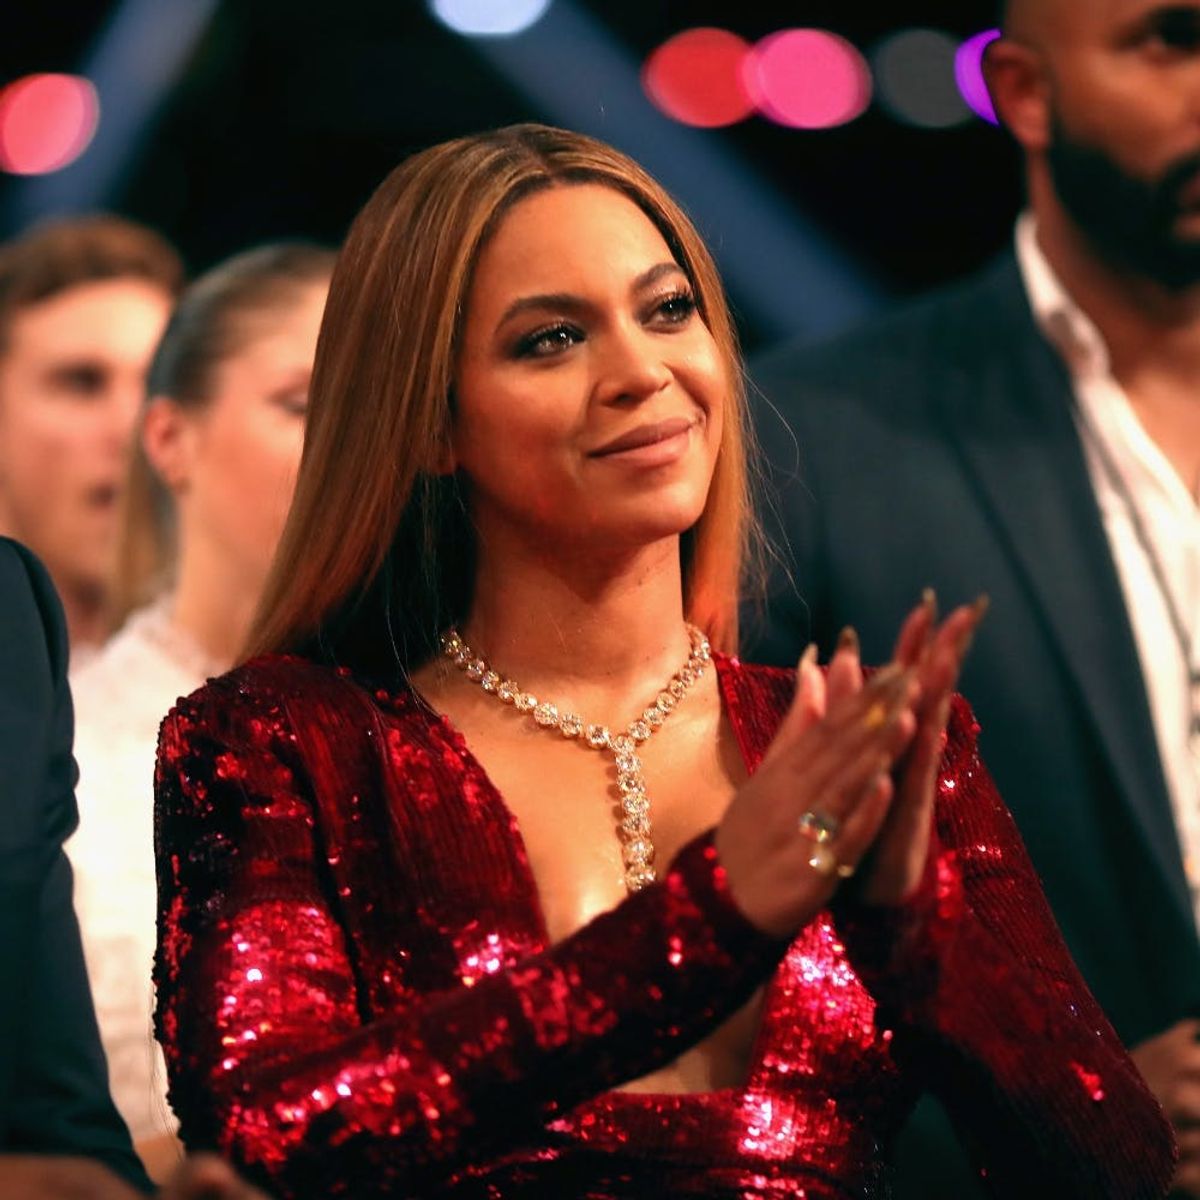 Beyoncé May Have Just Dropped the Biggest Hint About the Sex of Her Twins